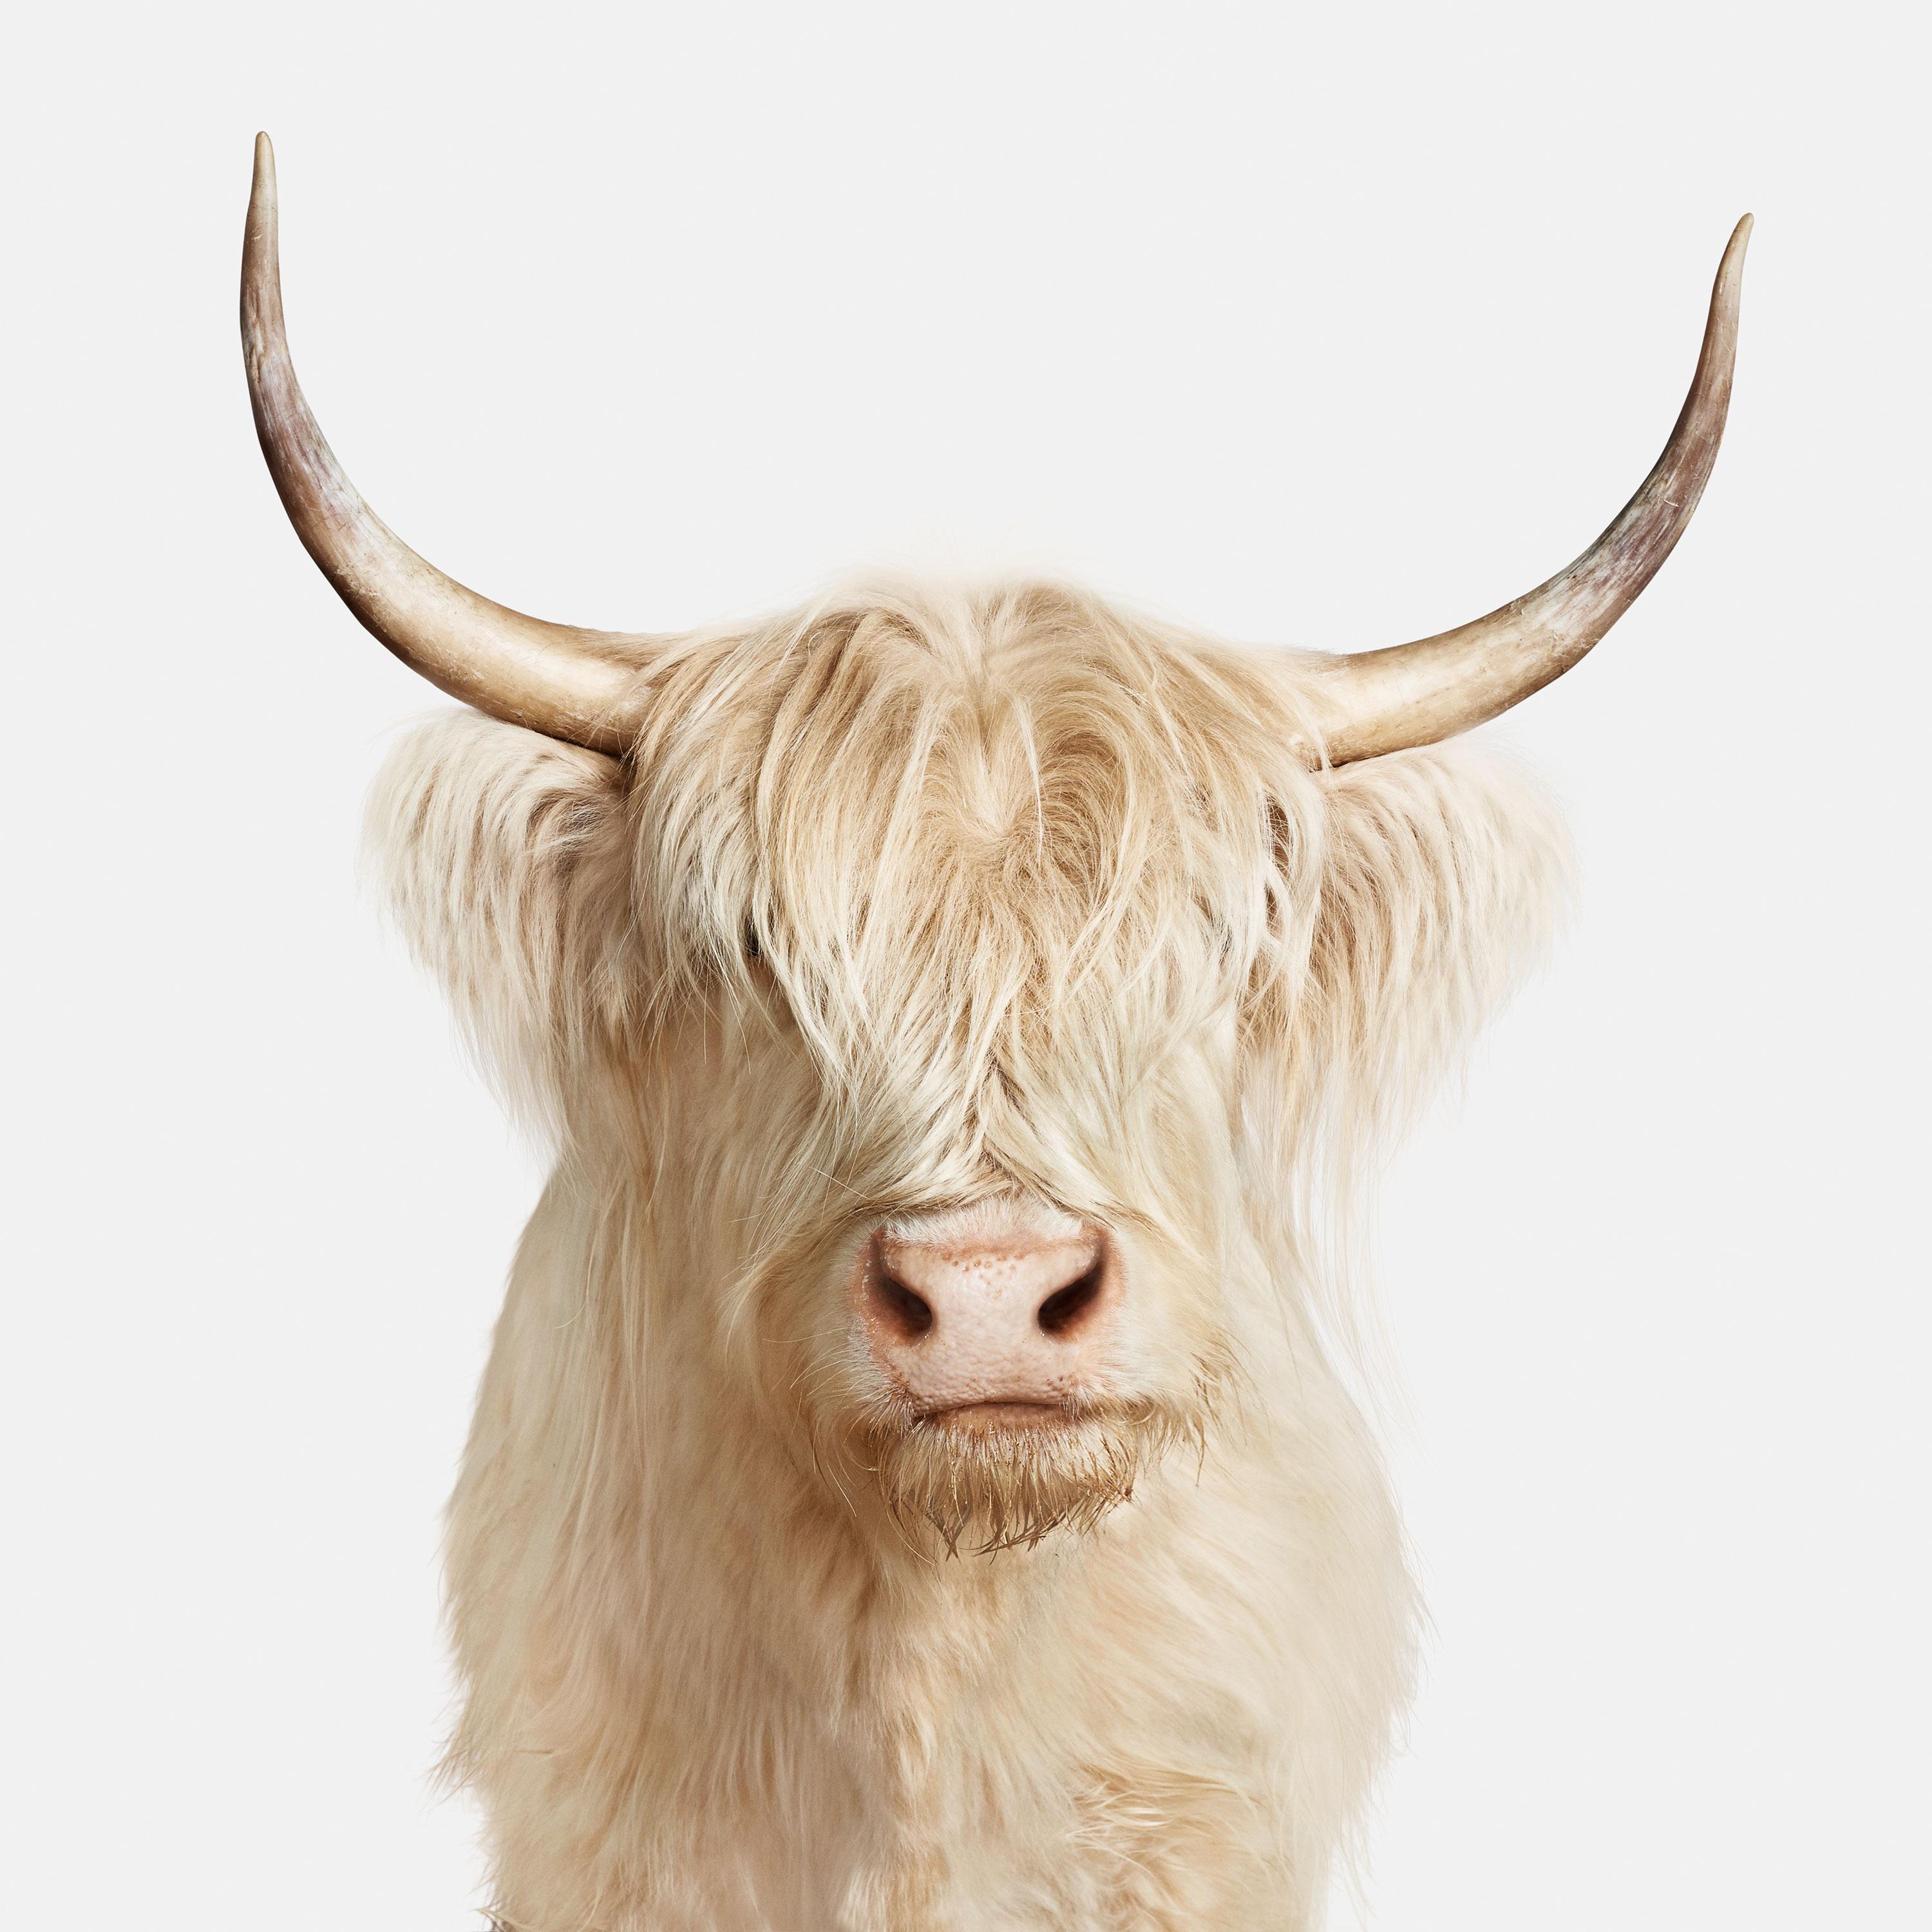 Randal Ford - Highland Cow No. 1, Photography 2018, Printed After